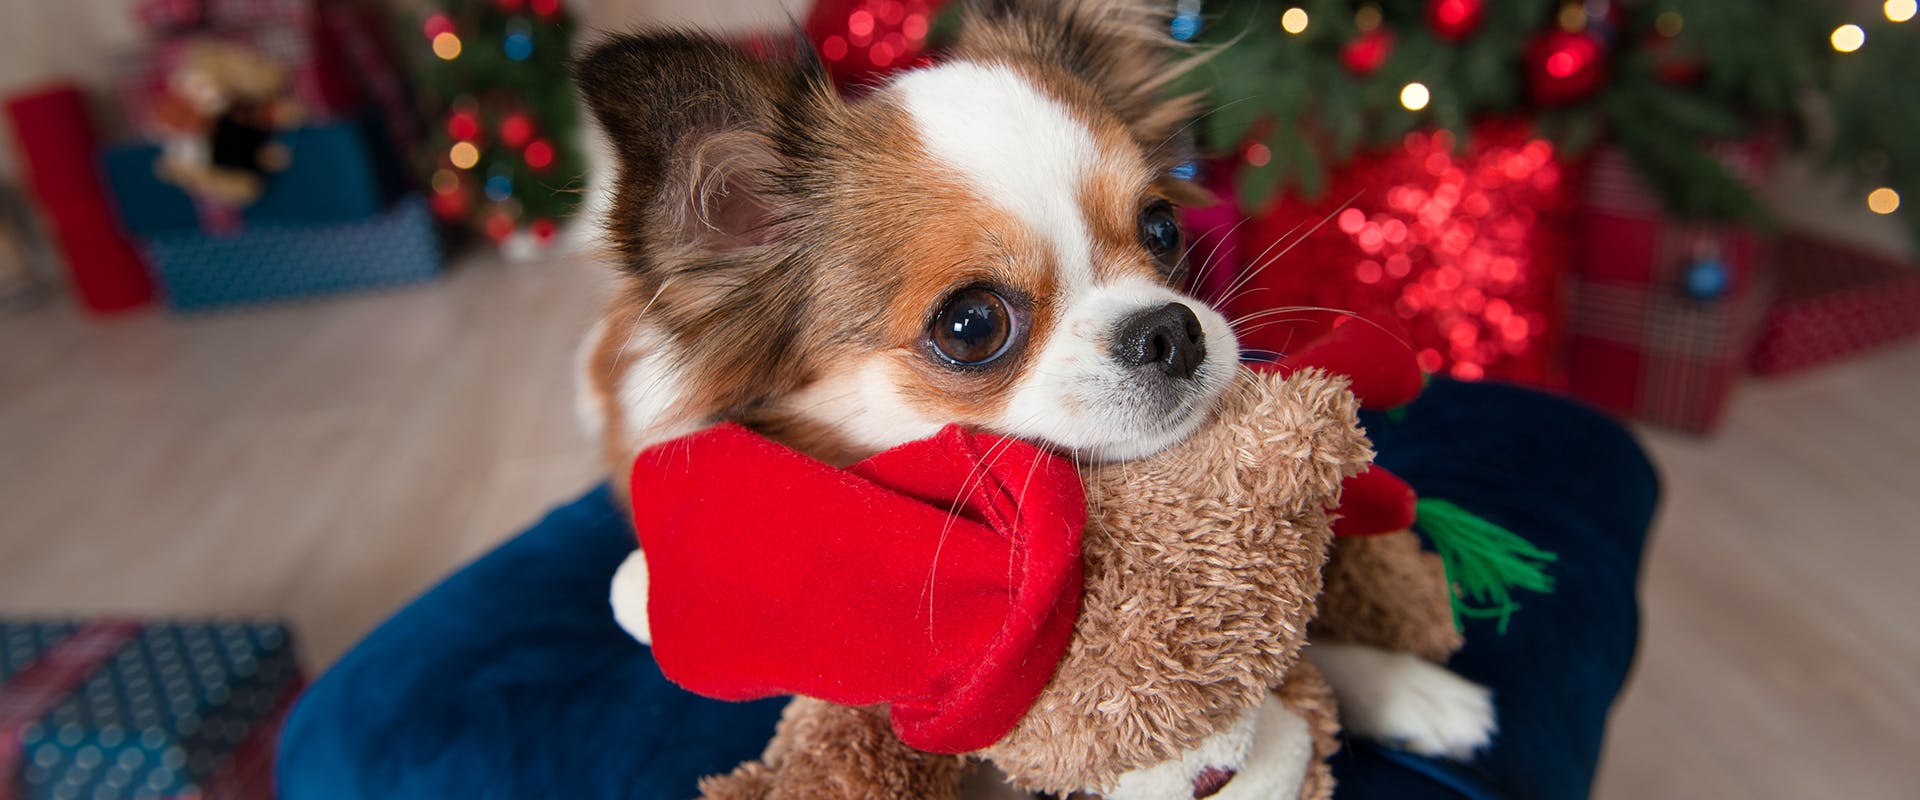 A small dog standing next to a Christmas tree, a fluffy toy hanging from its mouth